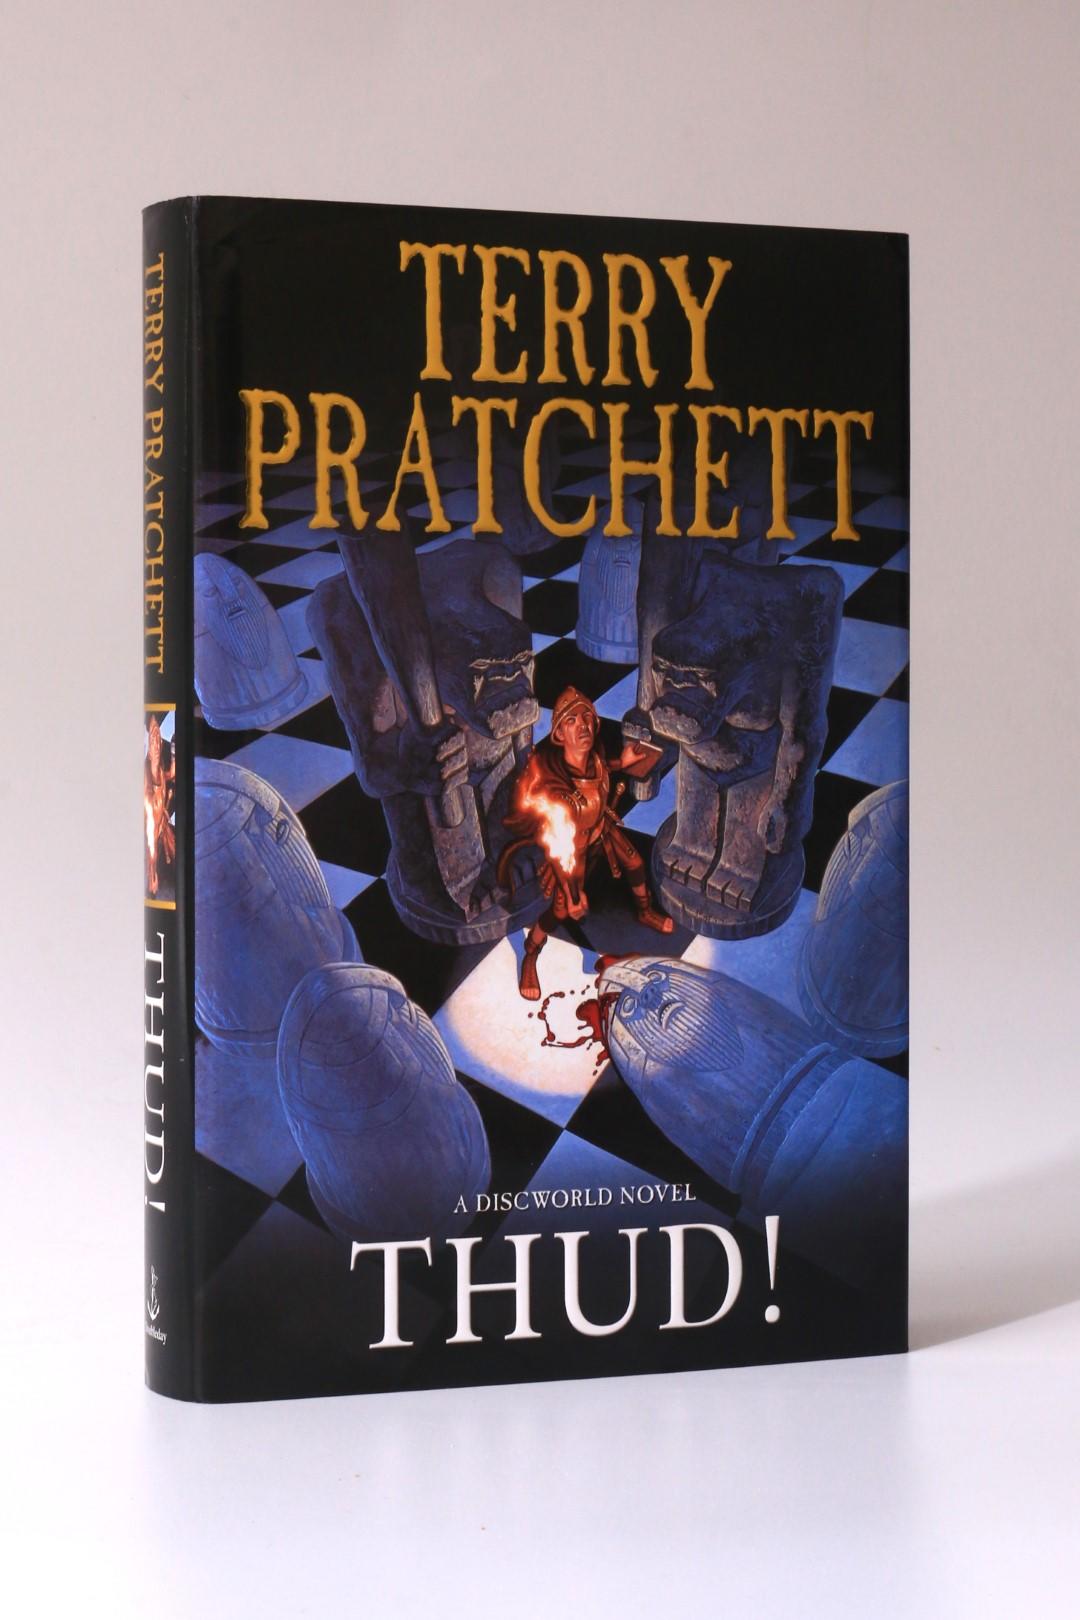 Terry Pratchett - Thud! - Doubleday, 2005, First Edition.